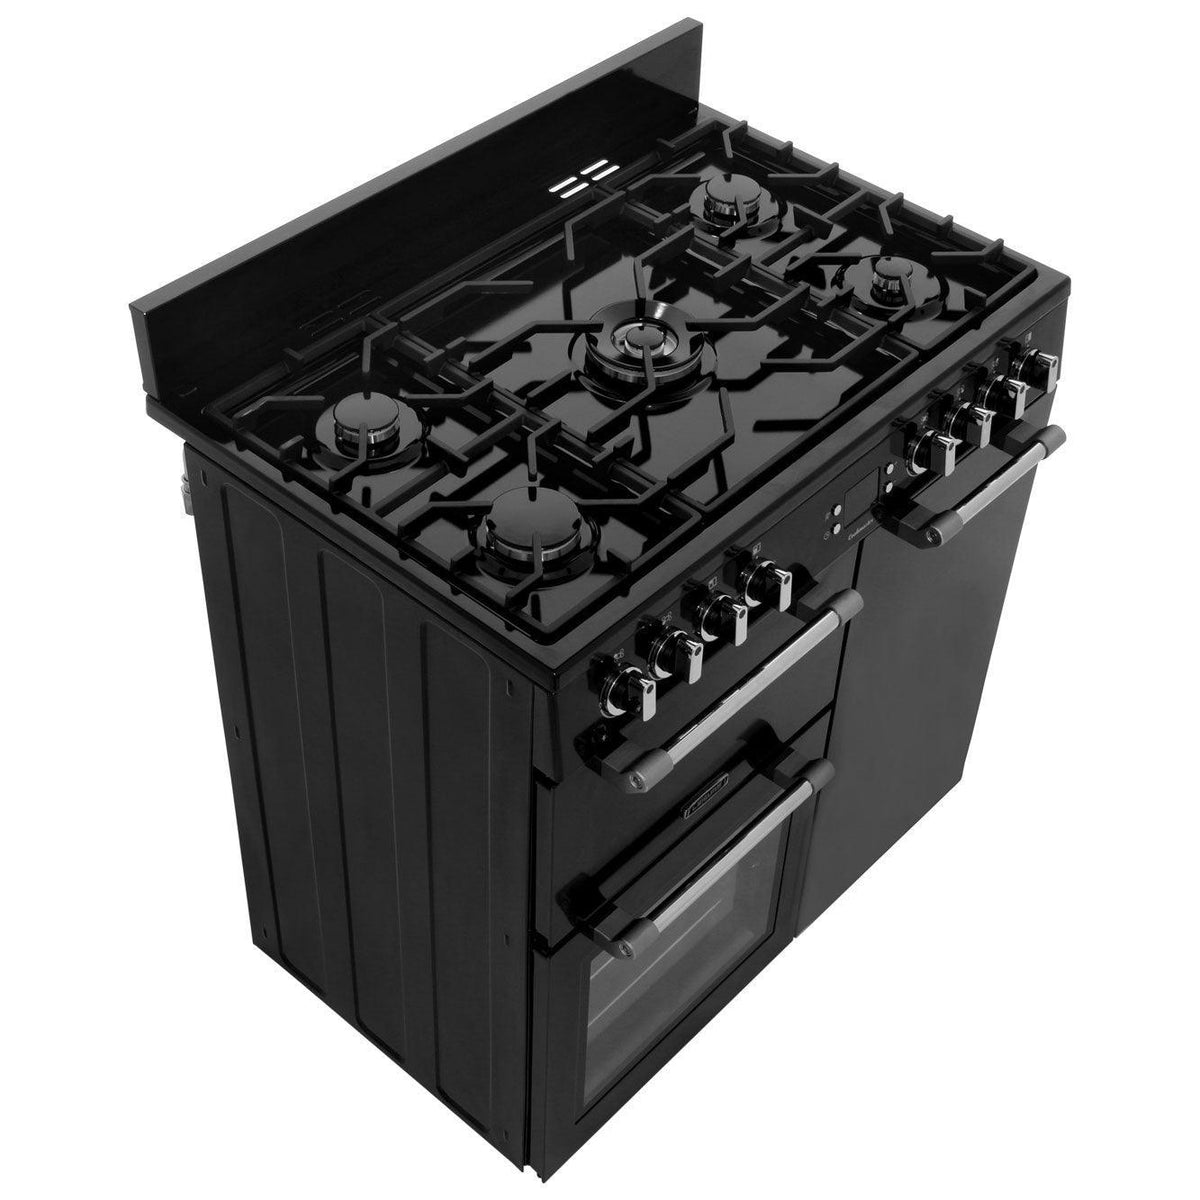 Leisure Cookmaster 90cm Dual Fuel Range Cooker - Black | CK90F232K from DID Electrical - guaranteed Irish, guaranteed quality service. (6890744185020)